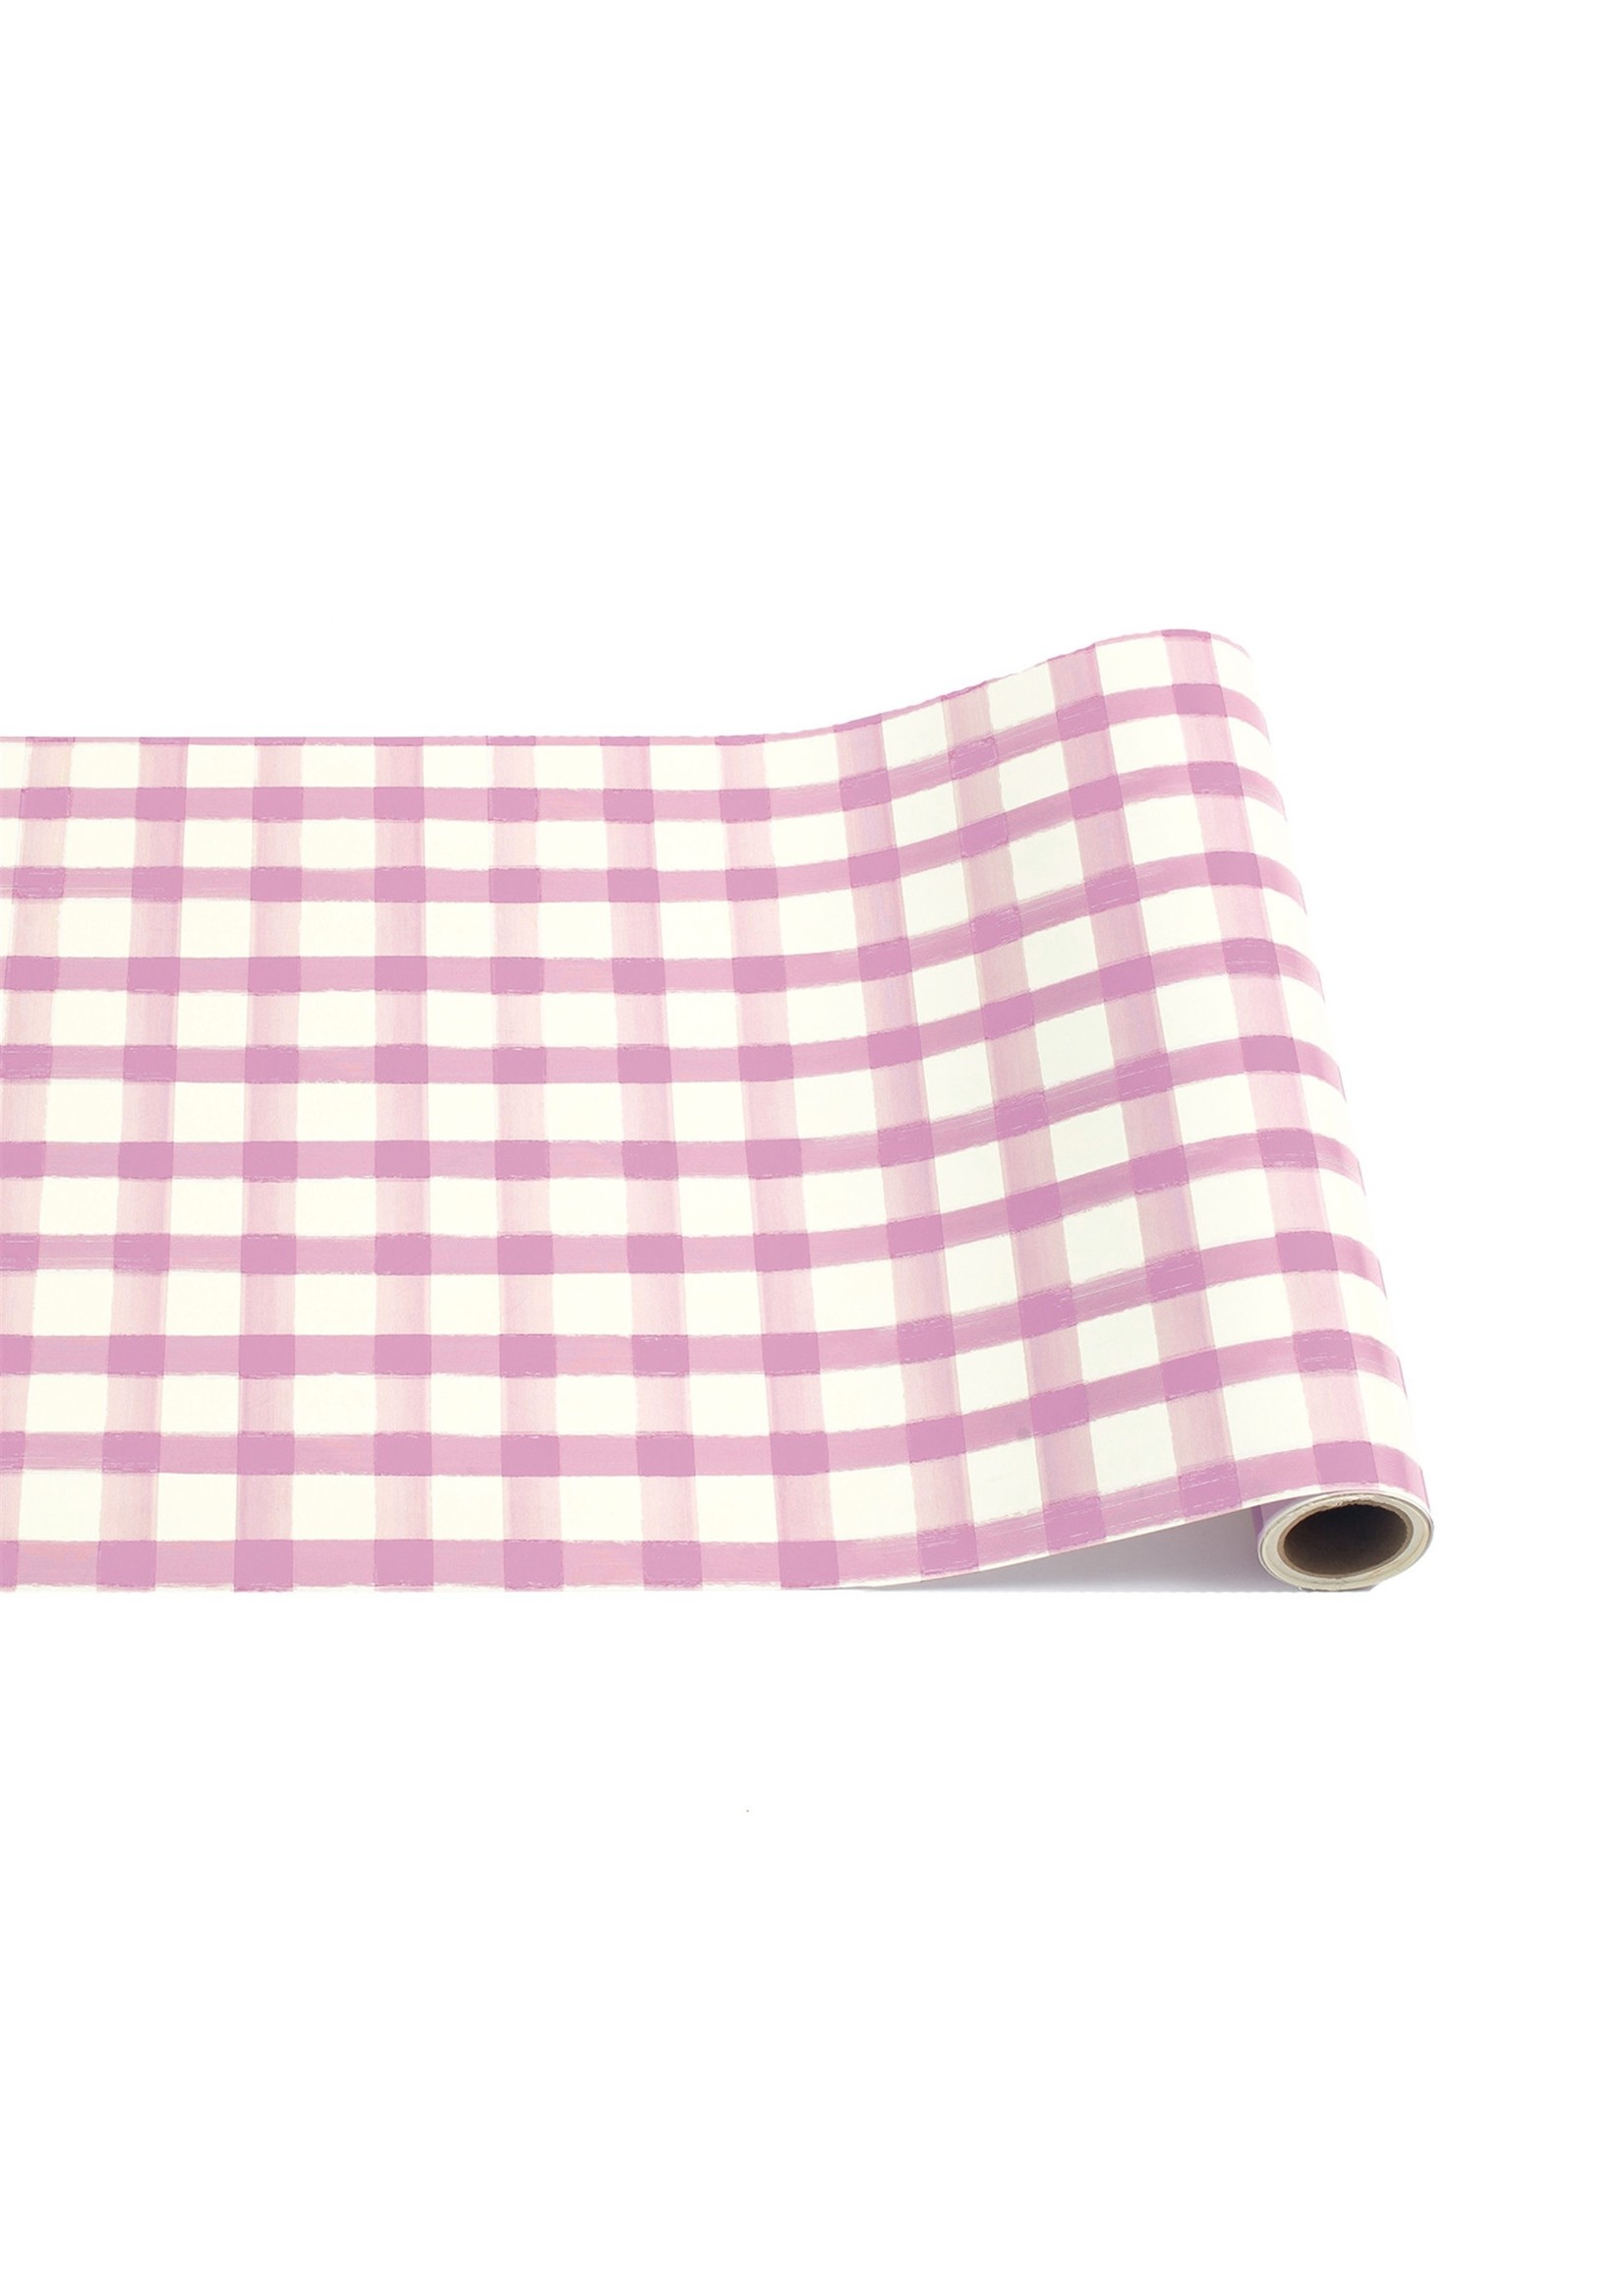 Hester & Cook Paper Runner - Painted Check Lilac